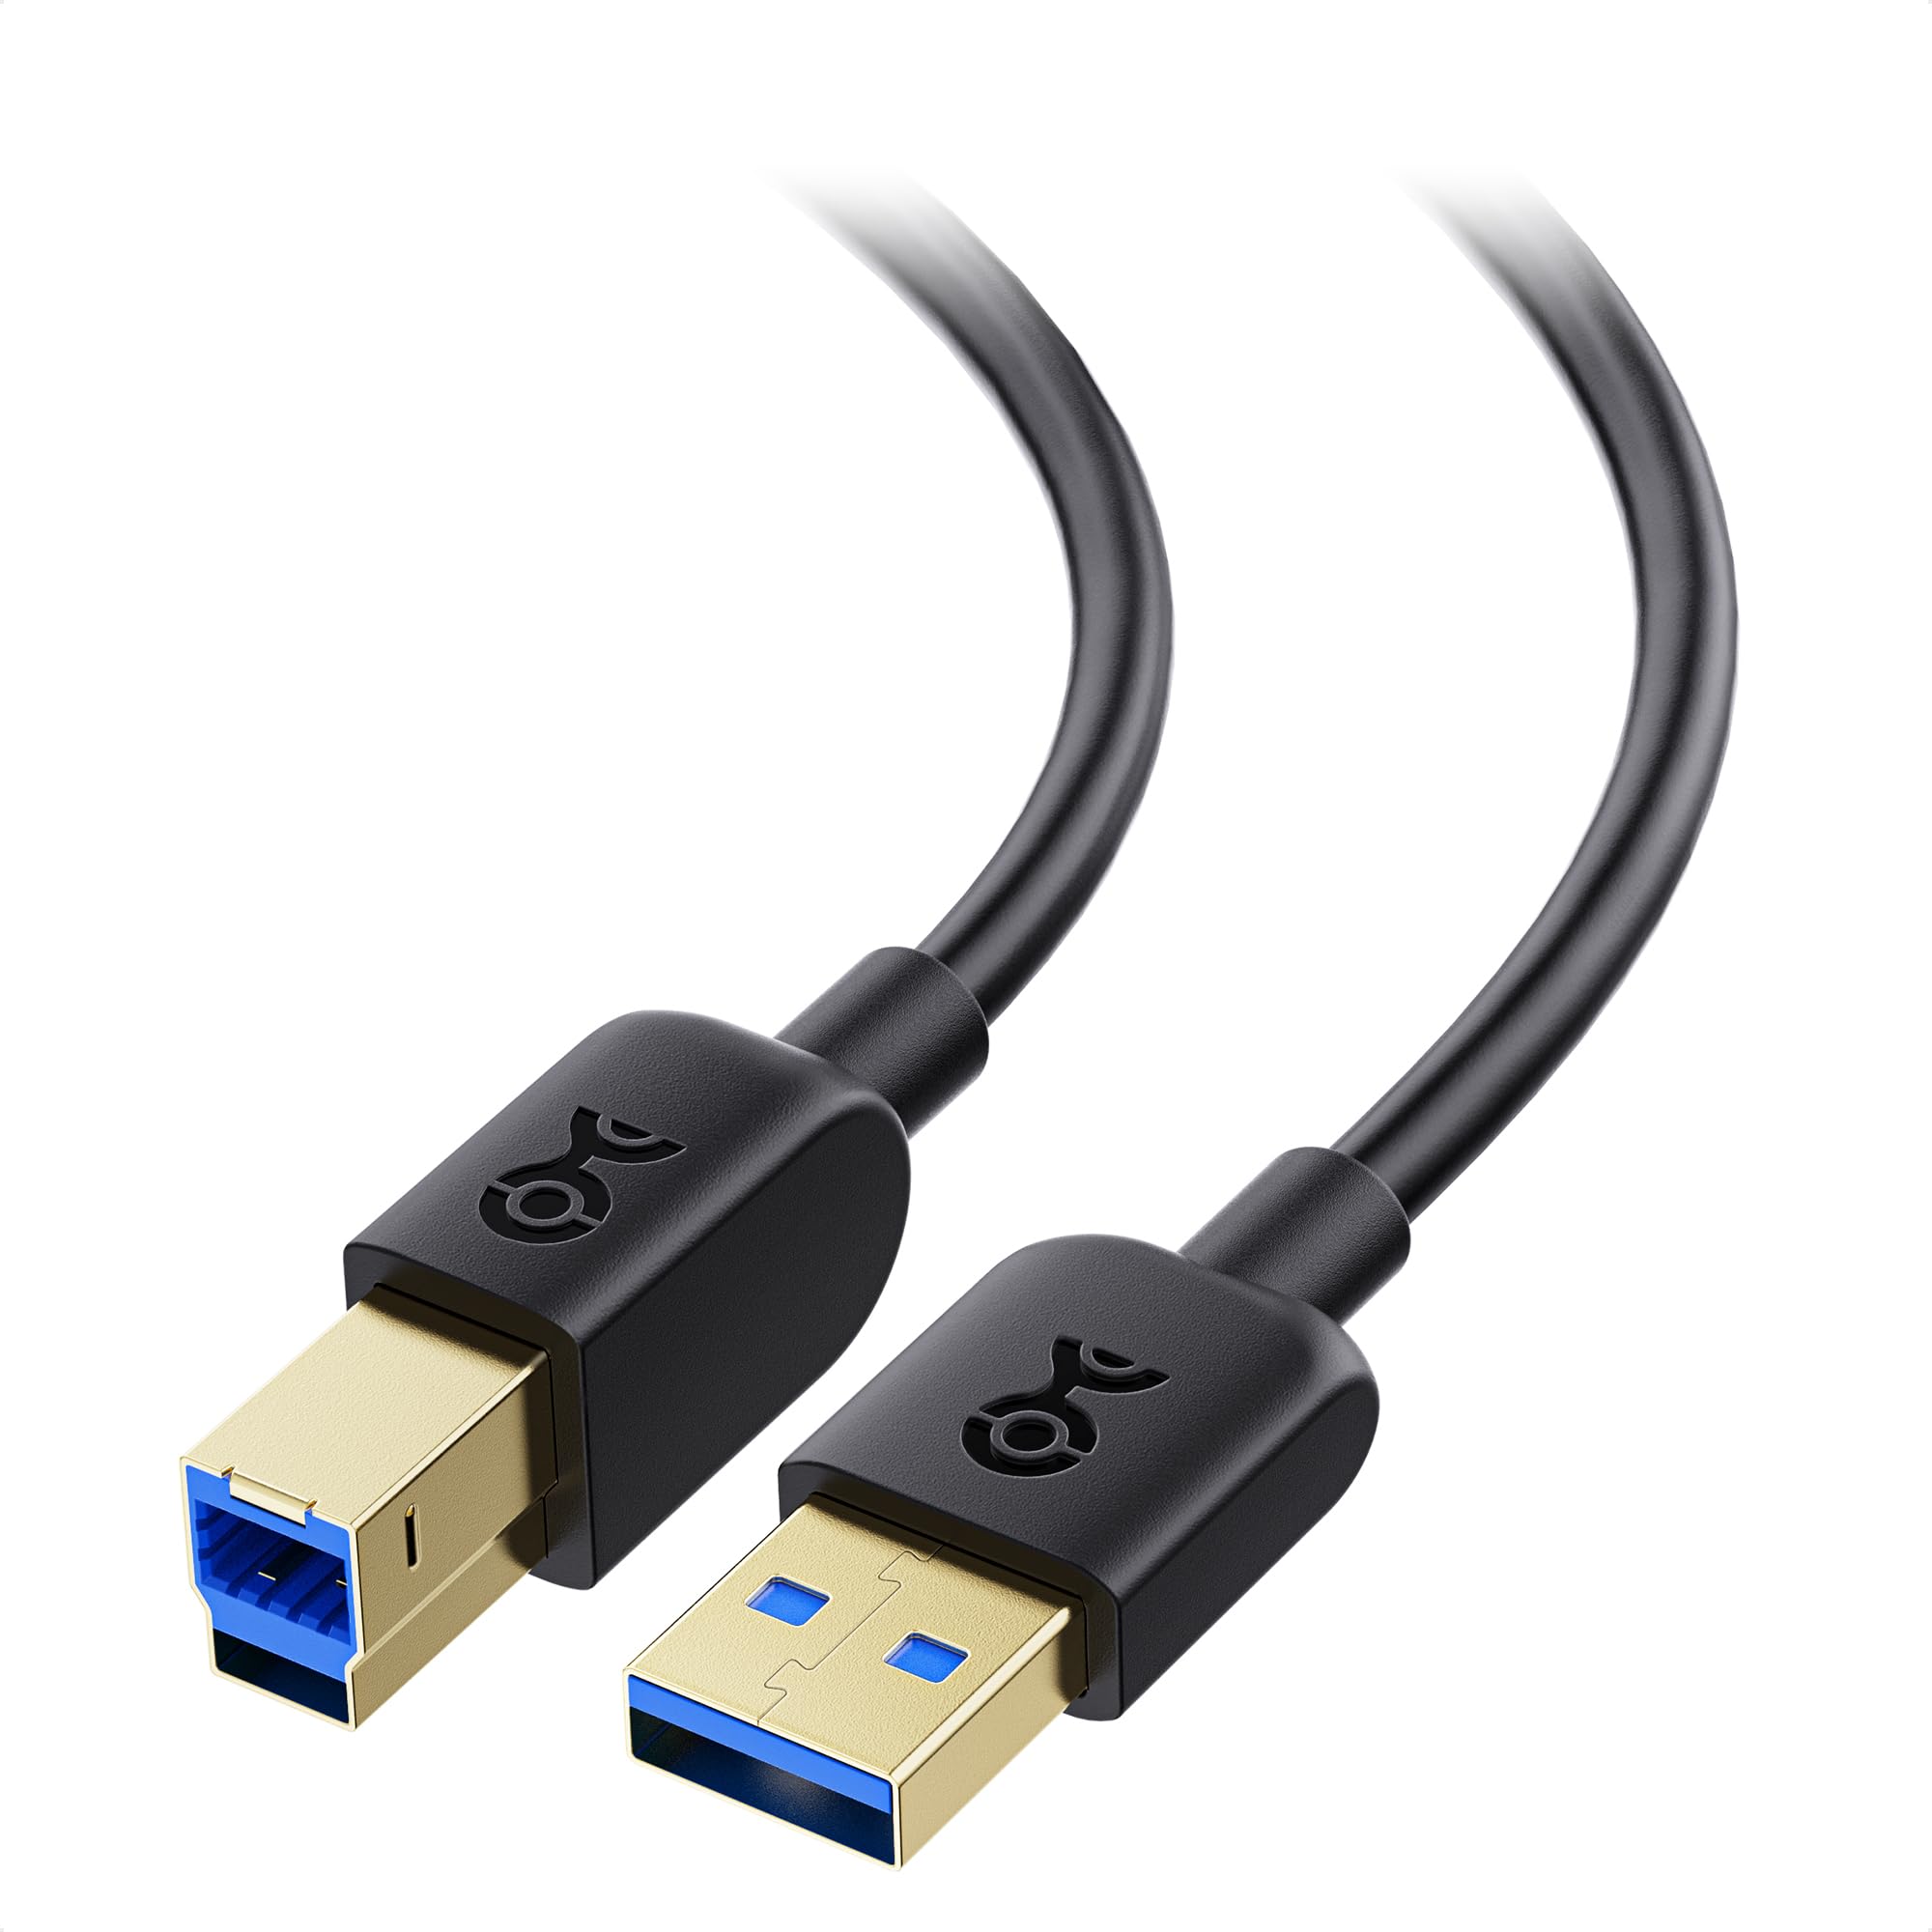 USB cable being disconnected from a computer